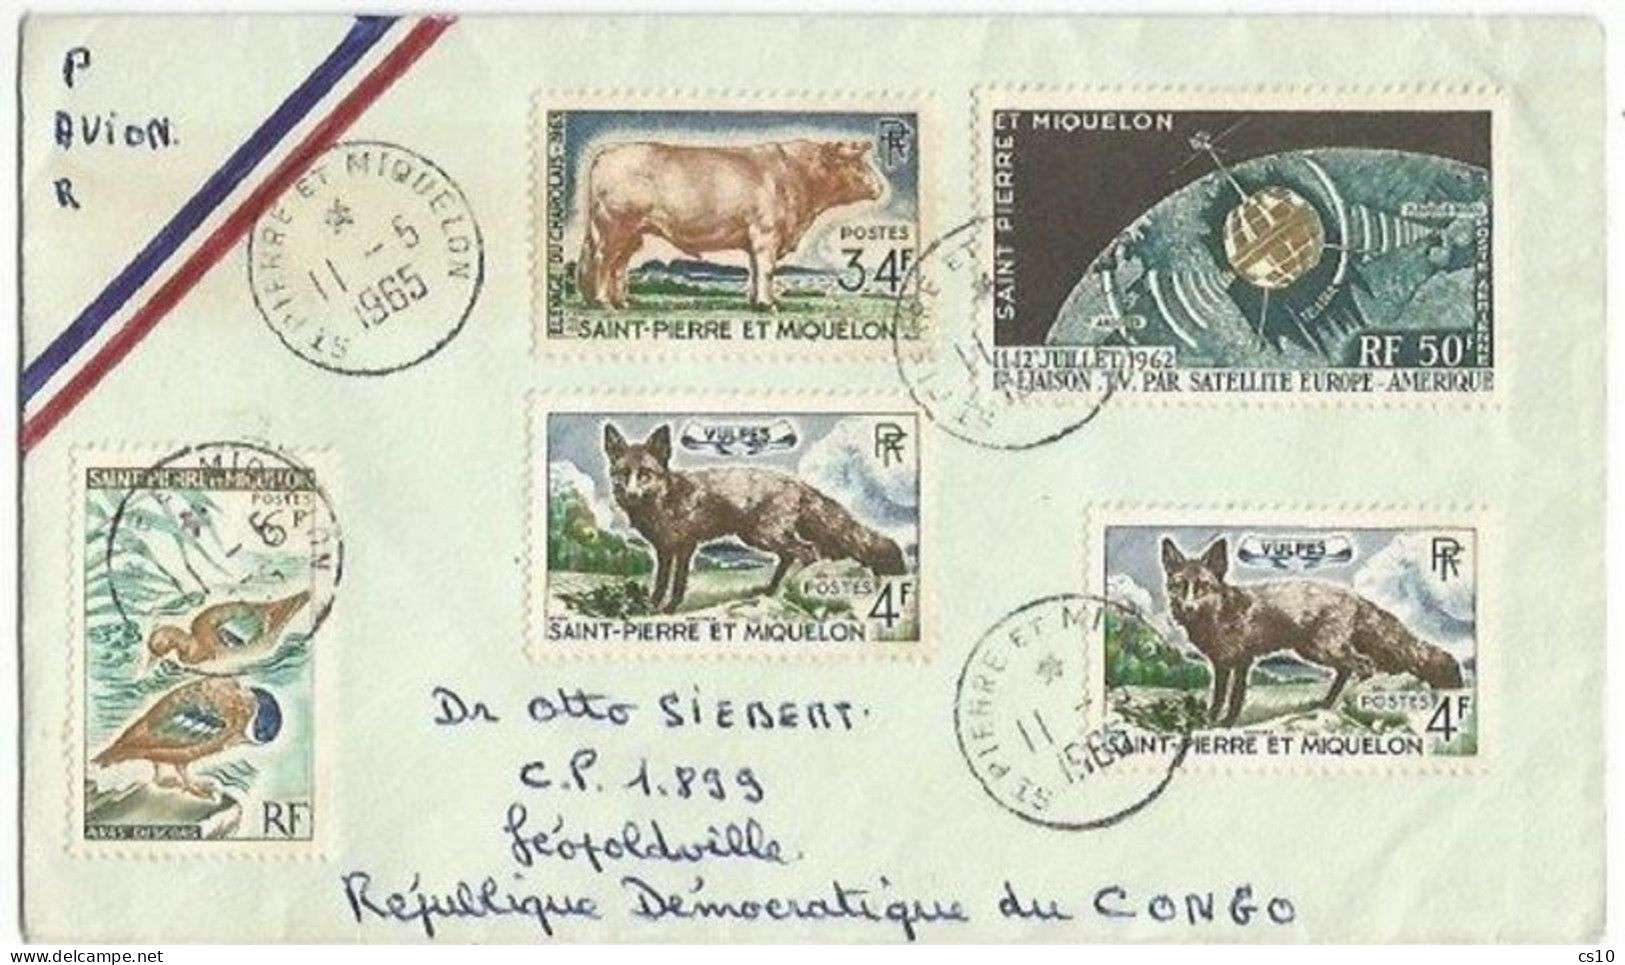 SCARCE! St.Pierre Miquelon AirmailCV 11may1965 With 5 Stamps Rate 98F DIRECTED TO CONGO Not France Or Canada !!!!!! - North  America